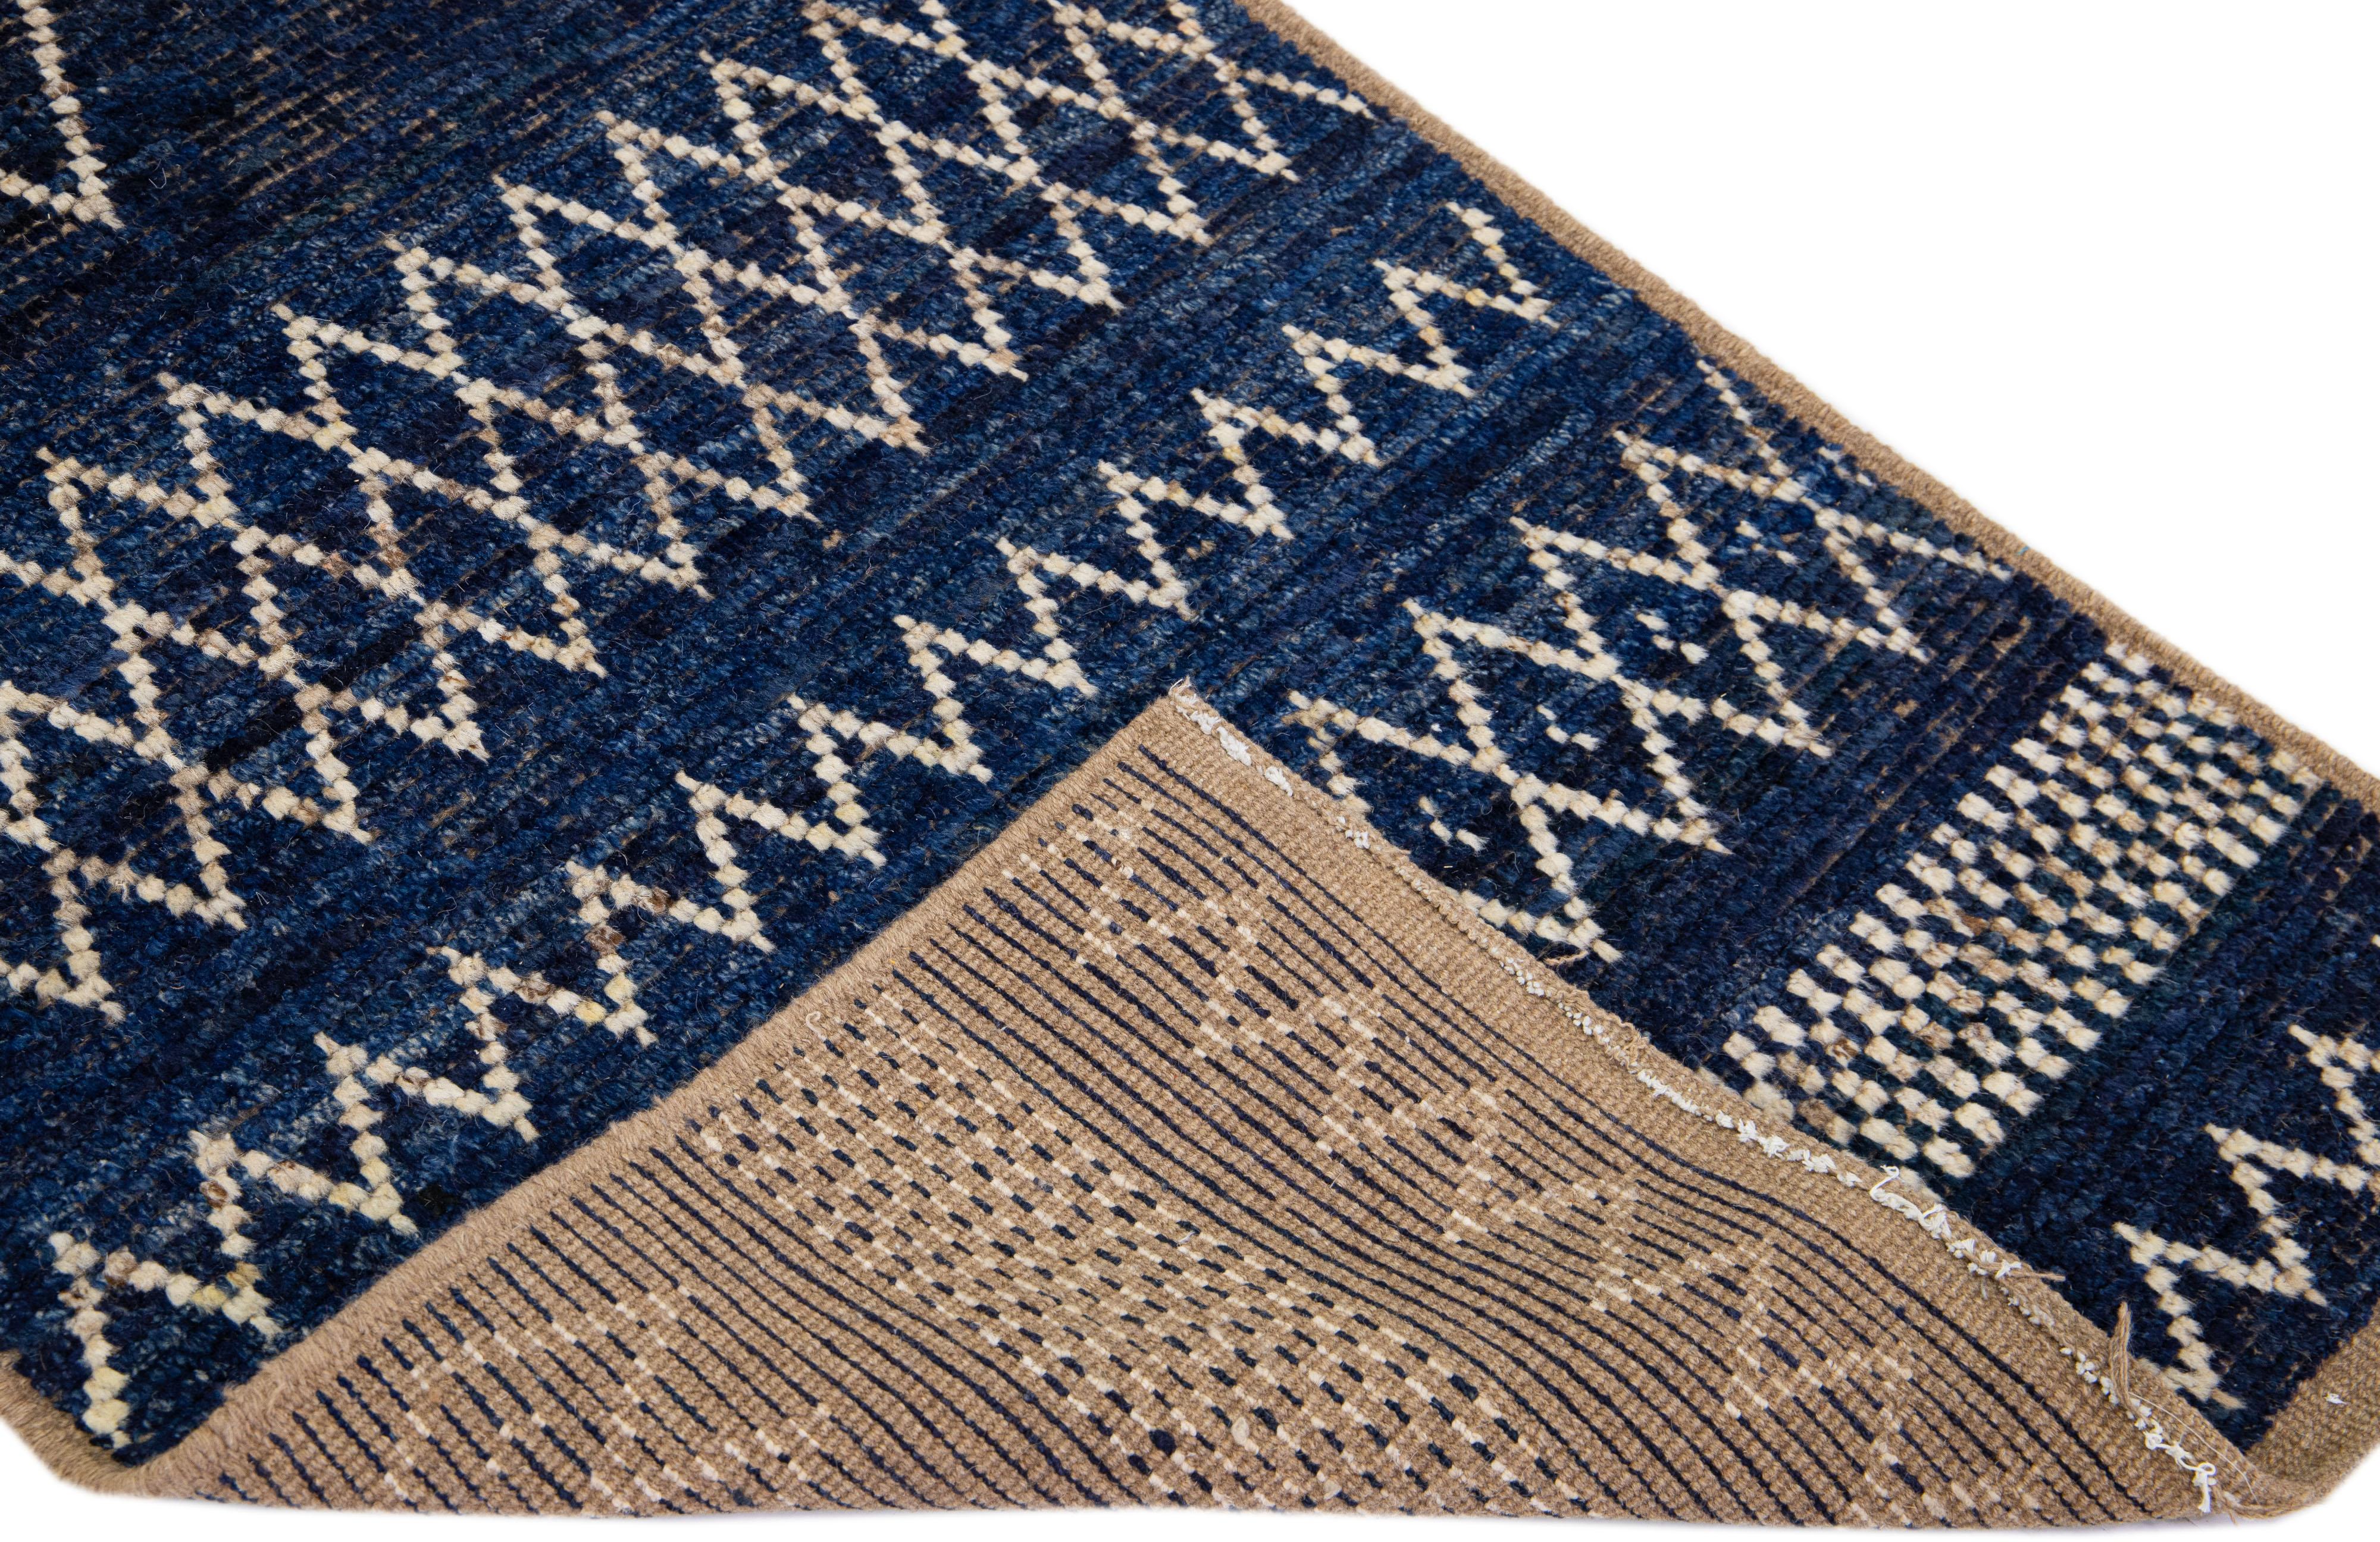 Beautiful Moroccan-style handmade wool rug with a navy blue field. This Modern rug has light brown and ivory accents featuring a gorgeous all-over geometric tribal design.

This rug measures: 2'10